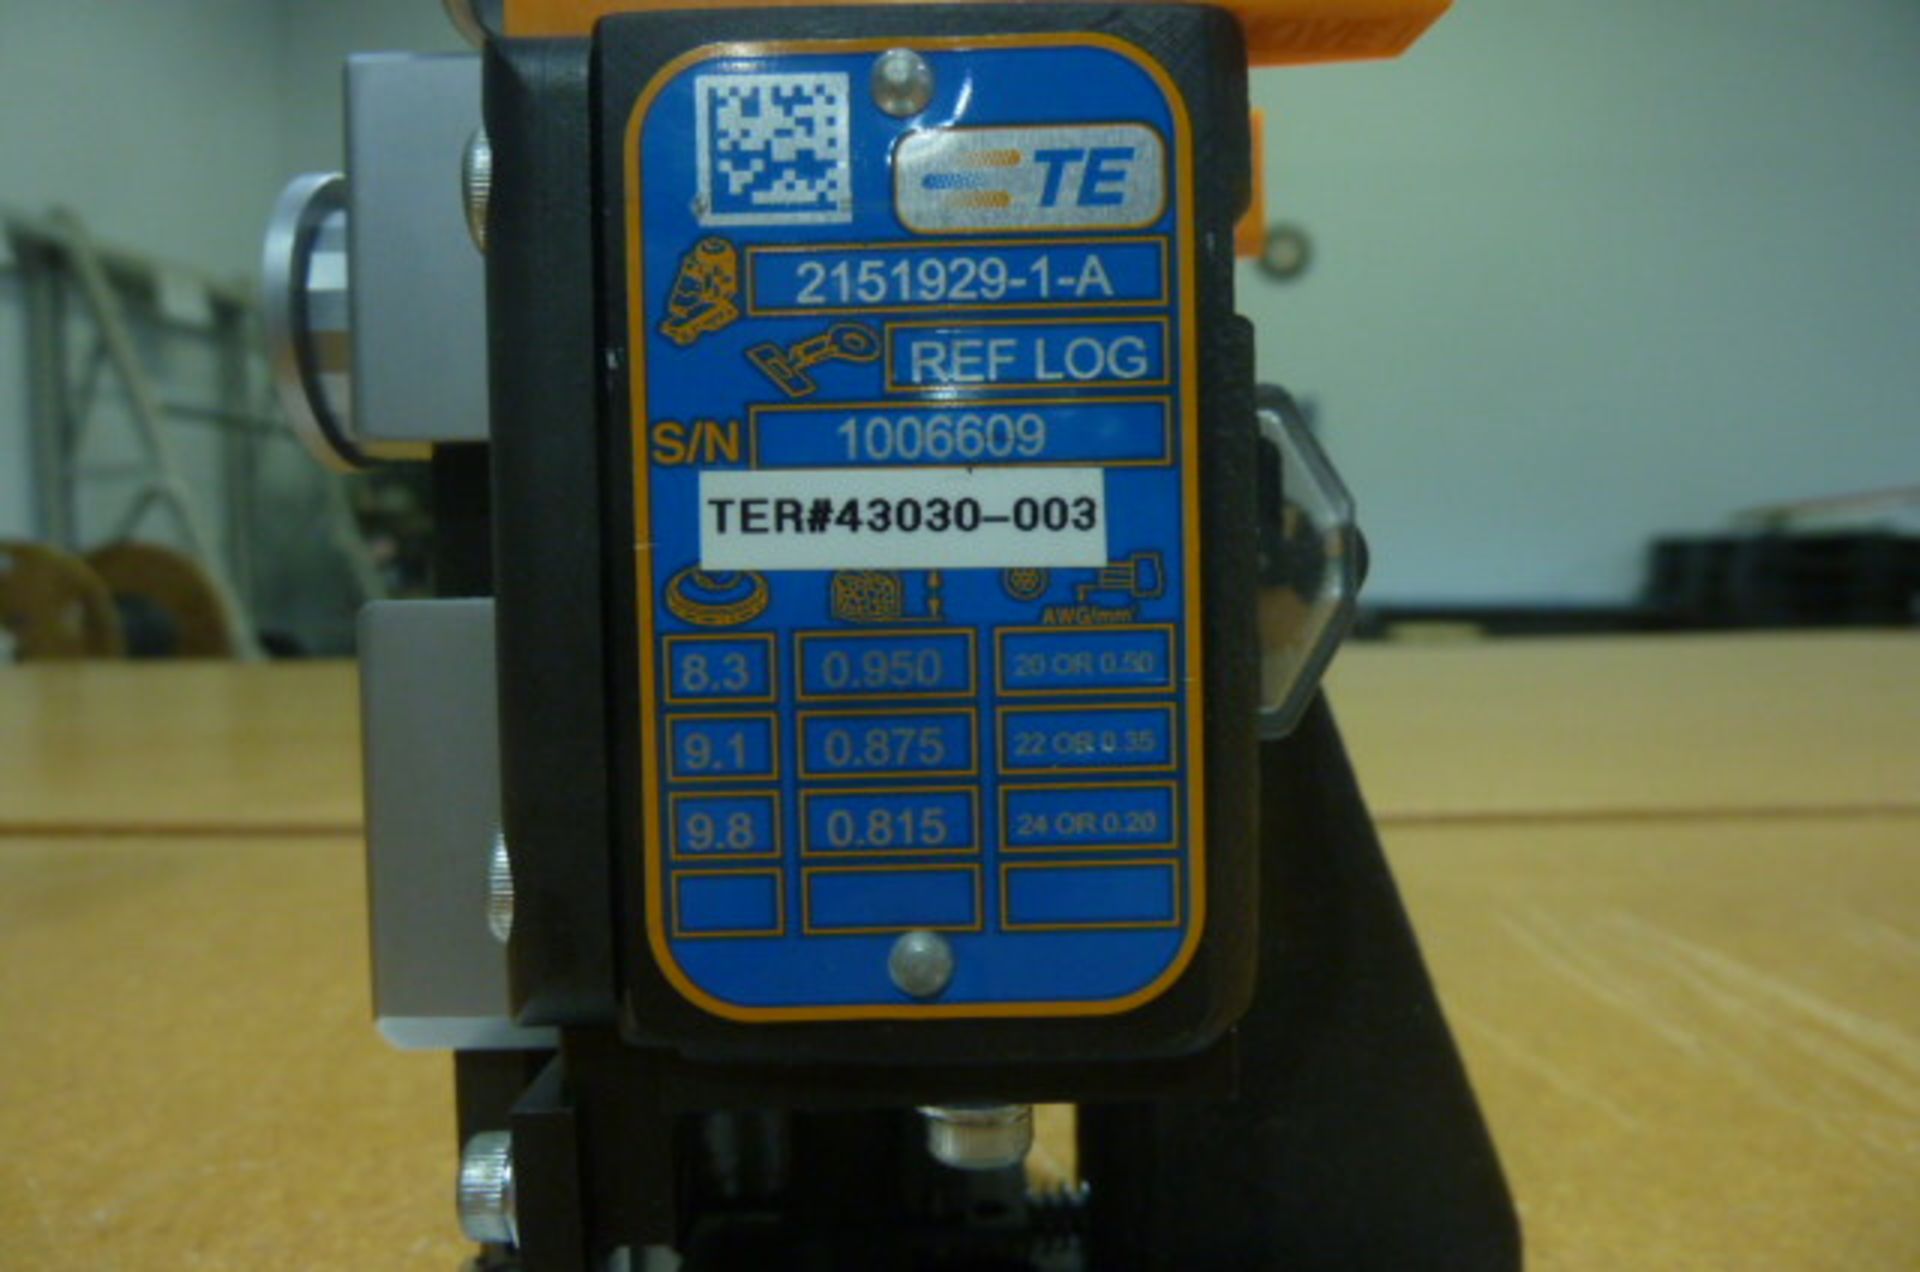 Applicator TE Md. 2151929 -1-A with 0266102 - Image 3 of 5